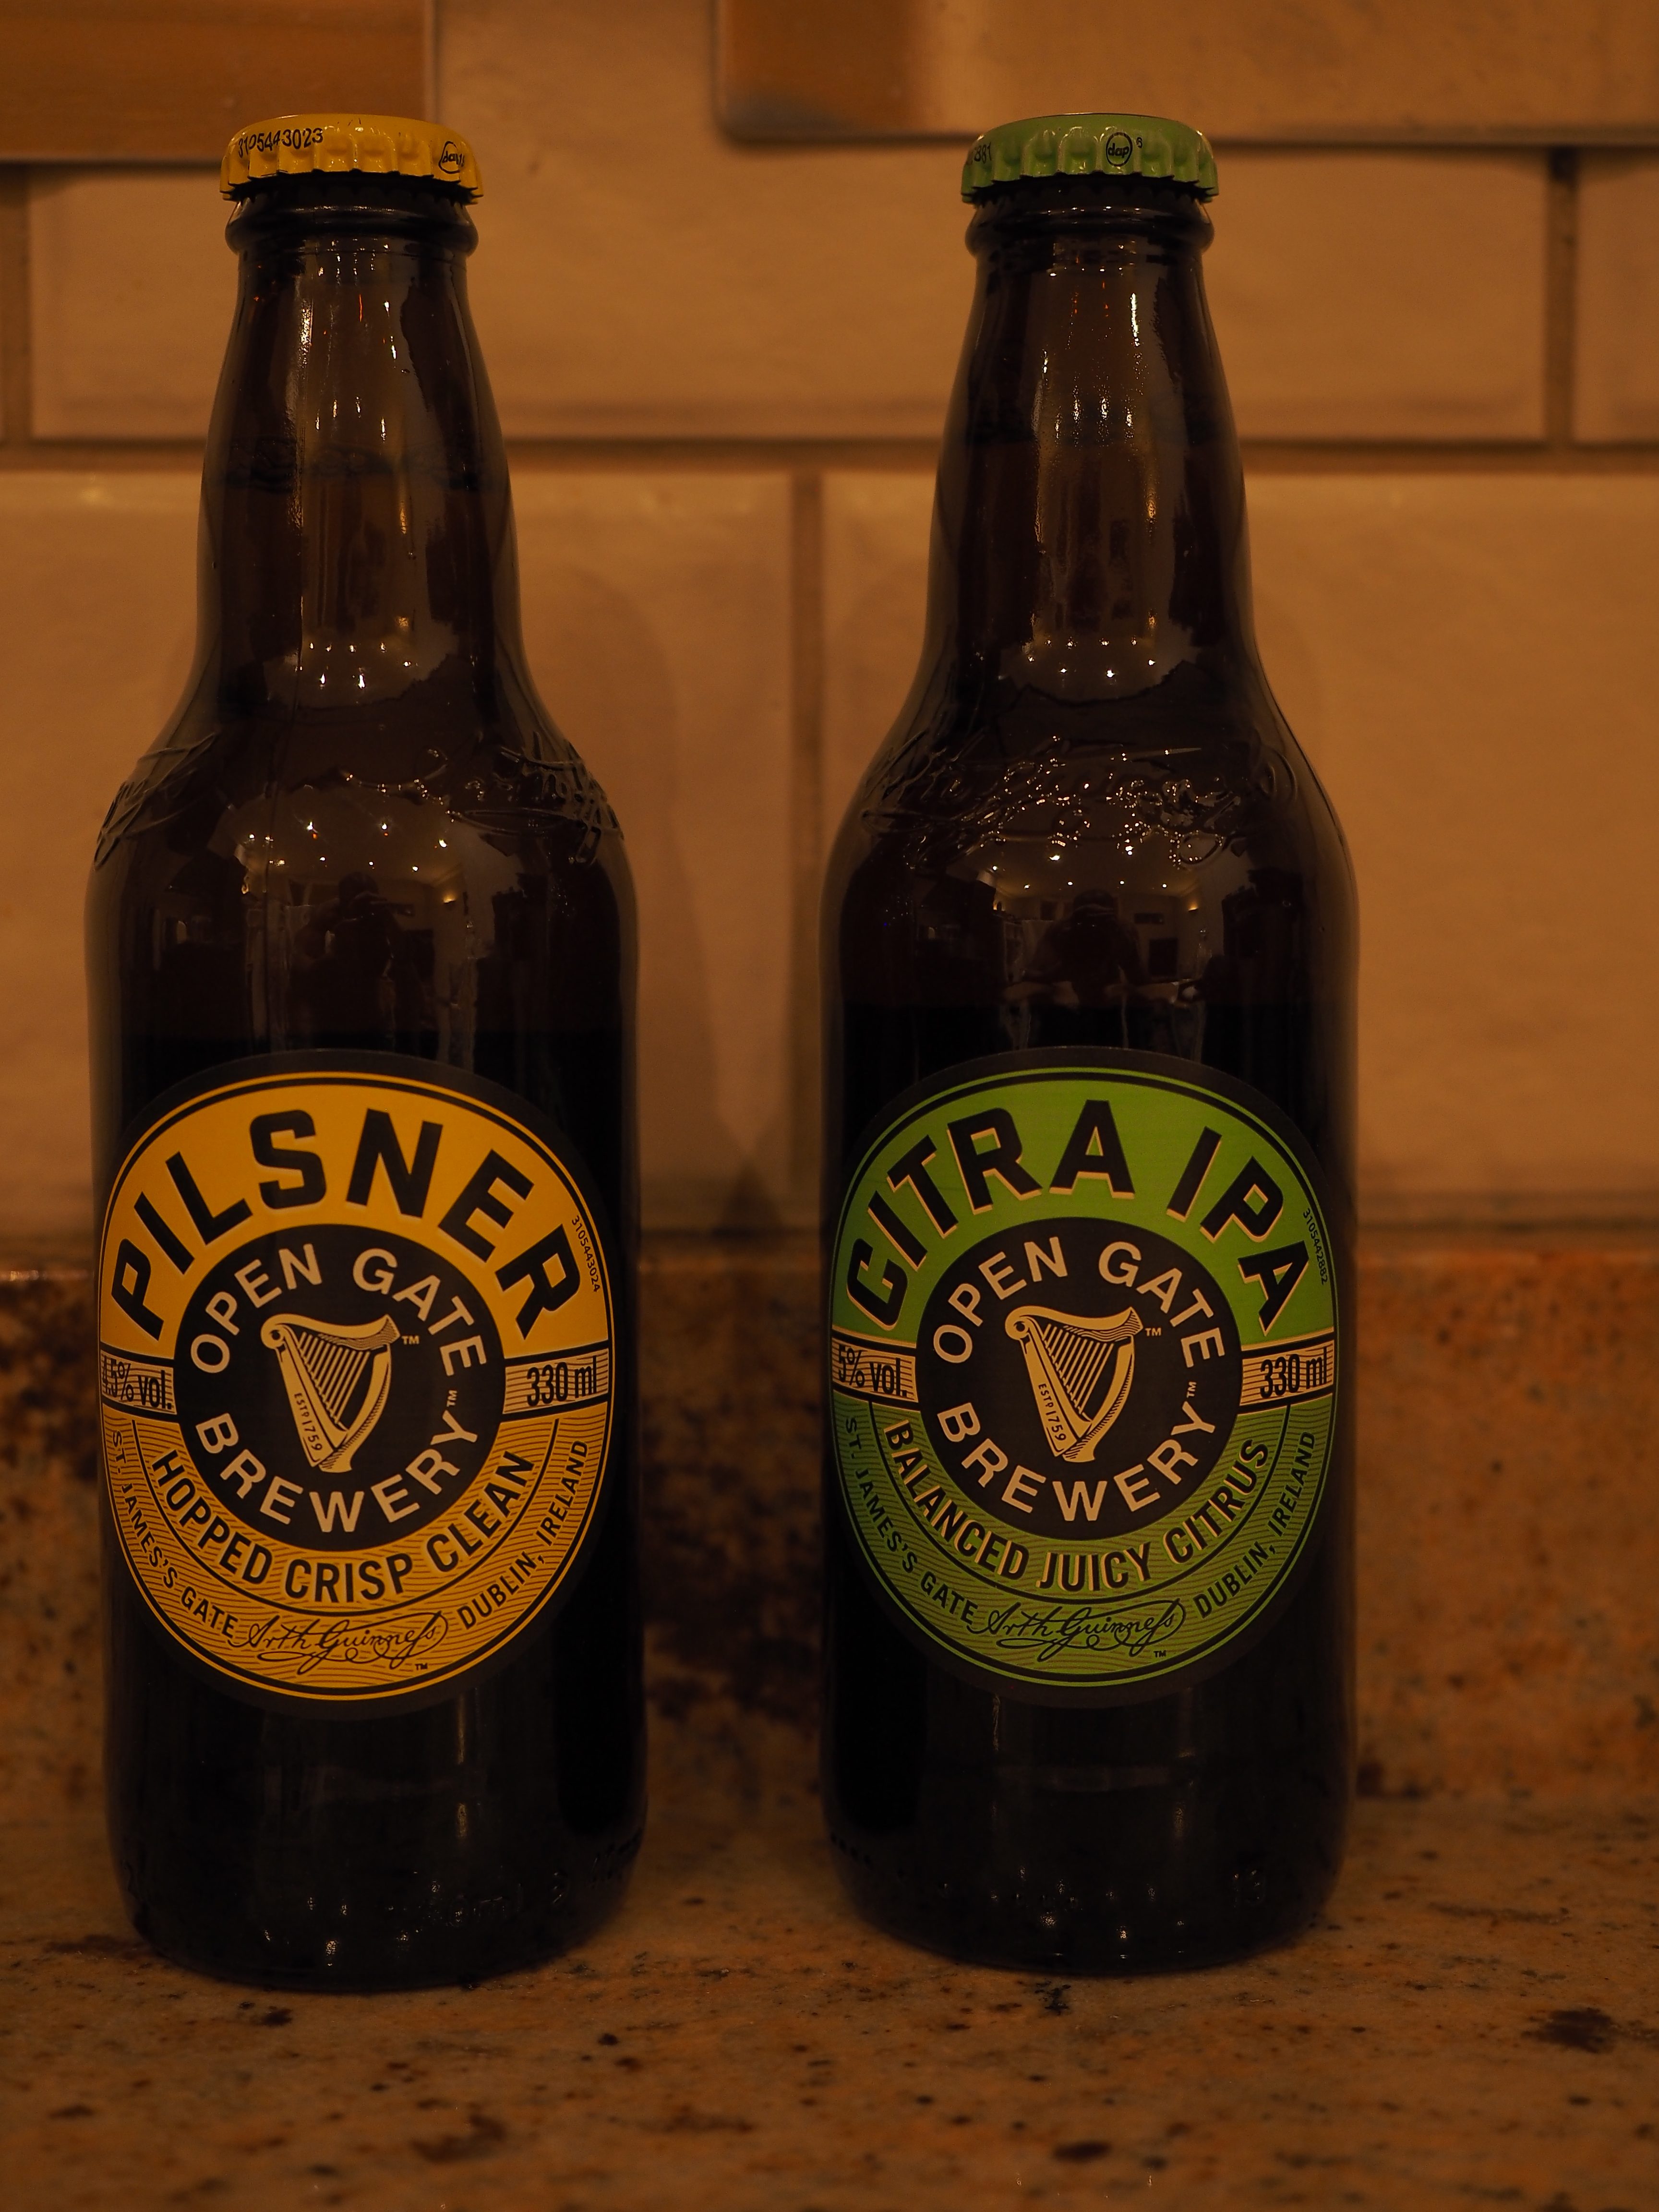 Guinness Launches Open Gate Brewery Citra IPA and Pilsner